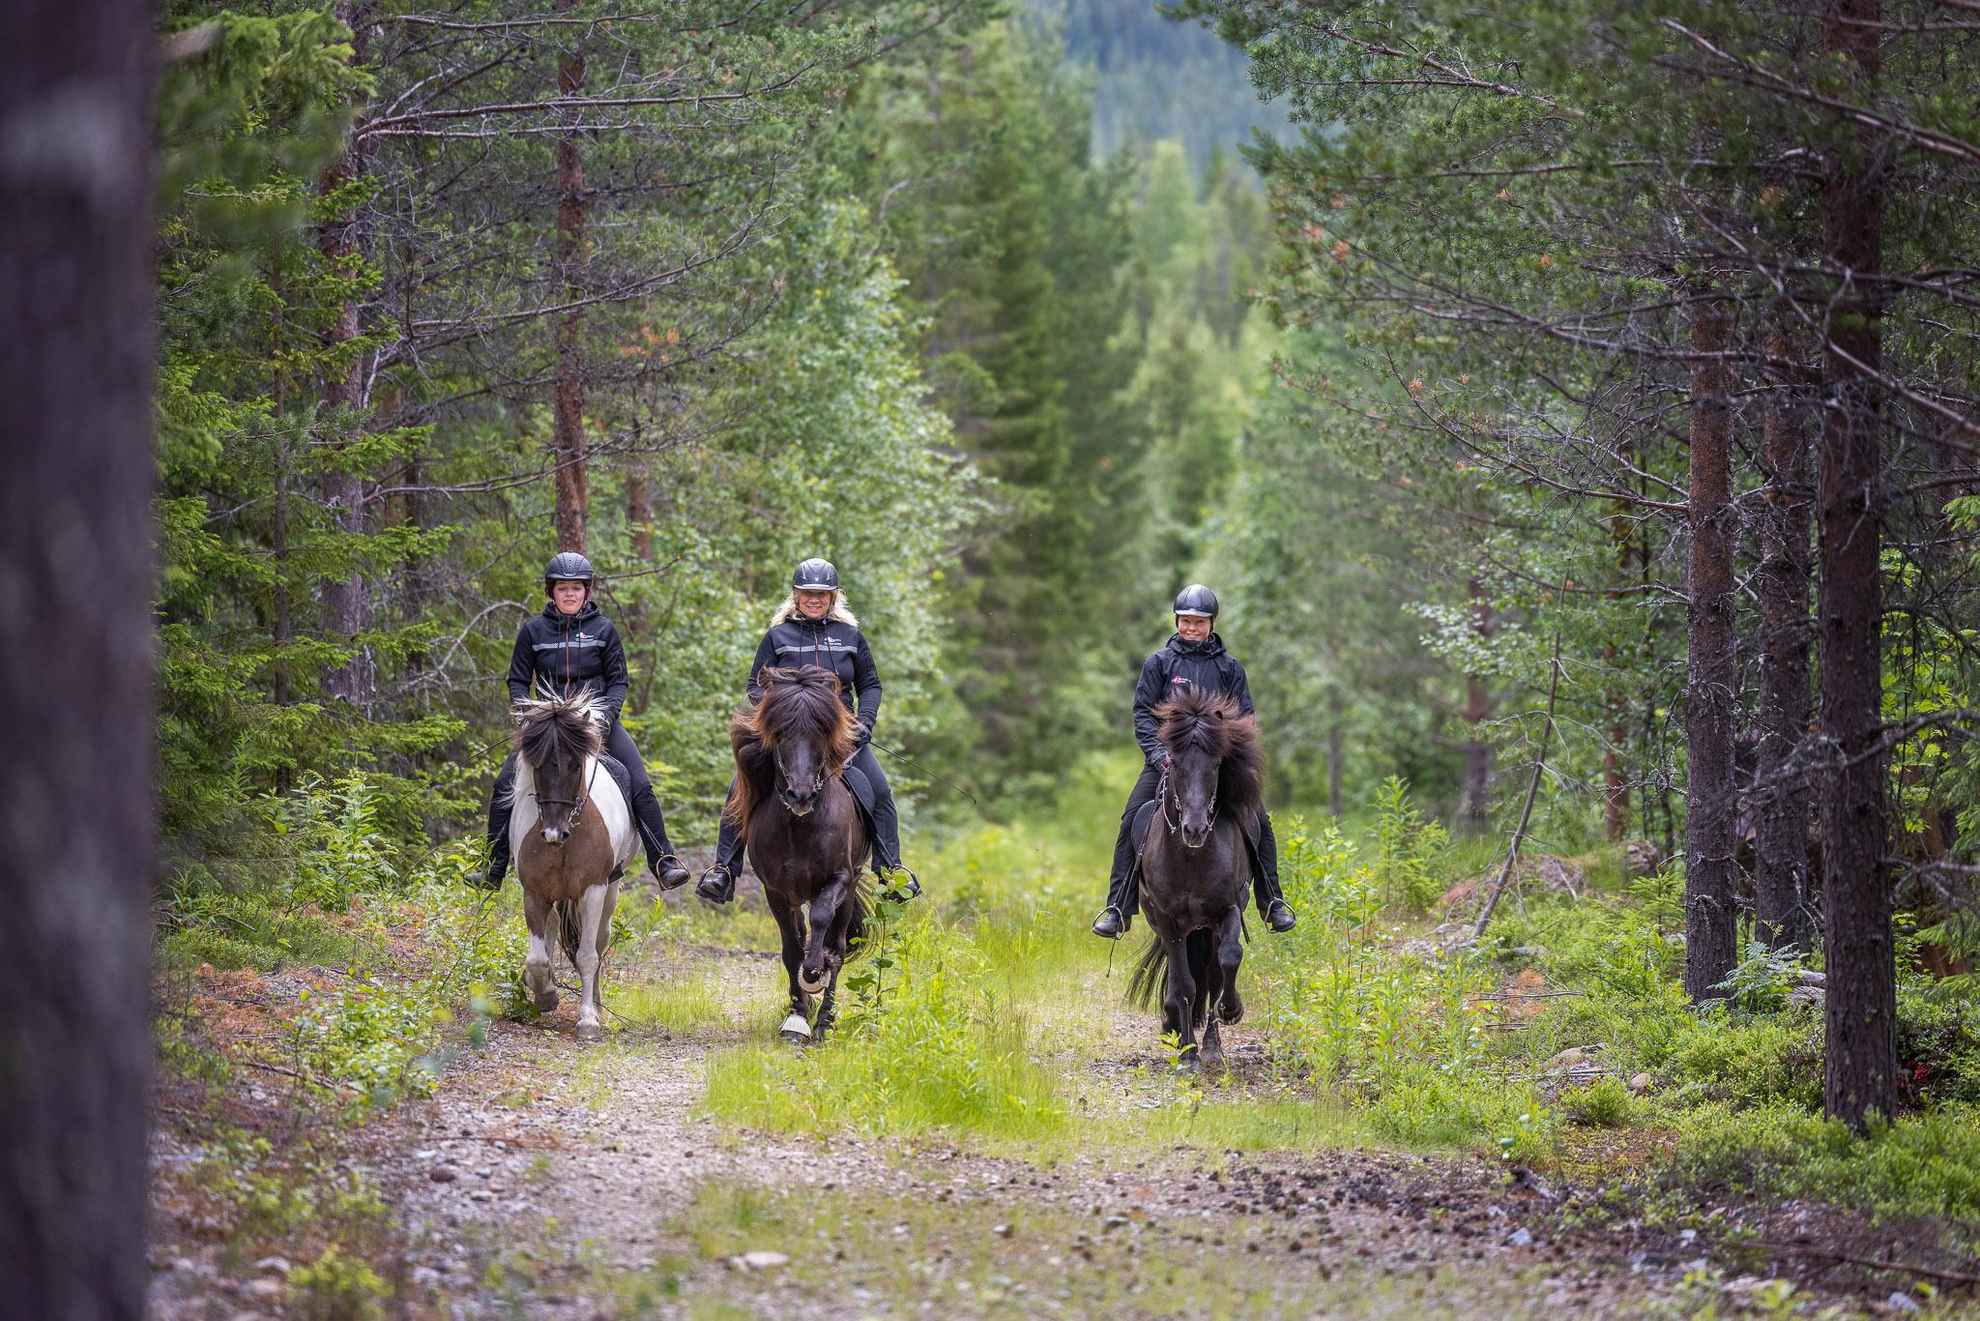 Three women riding Icelandic horses on a road in a forest.